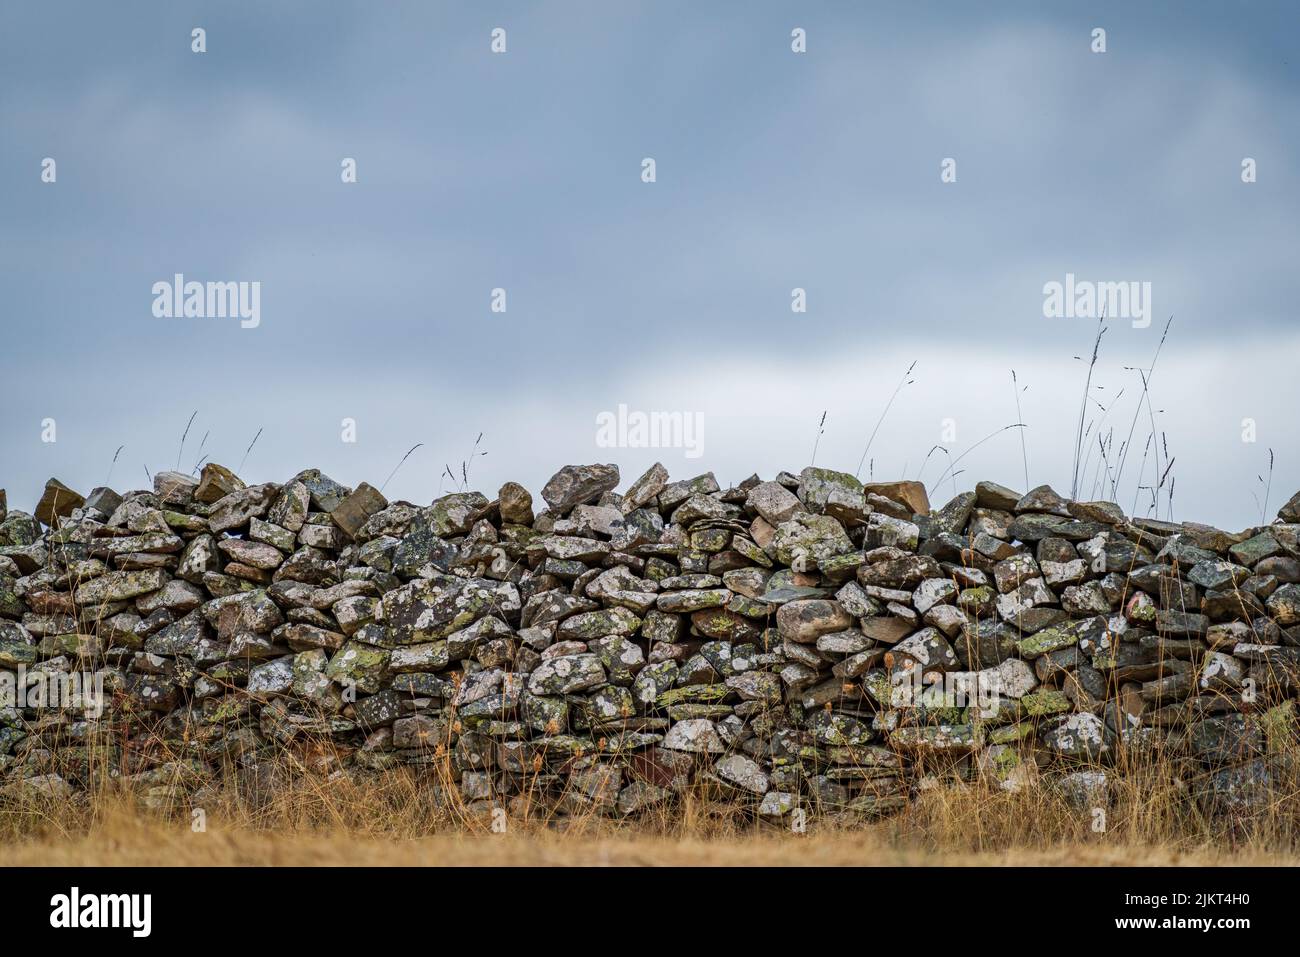 Ancient stone wall under cloudy stormy sky Stock Photo